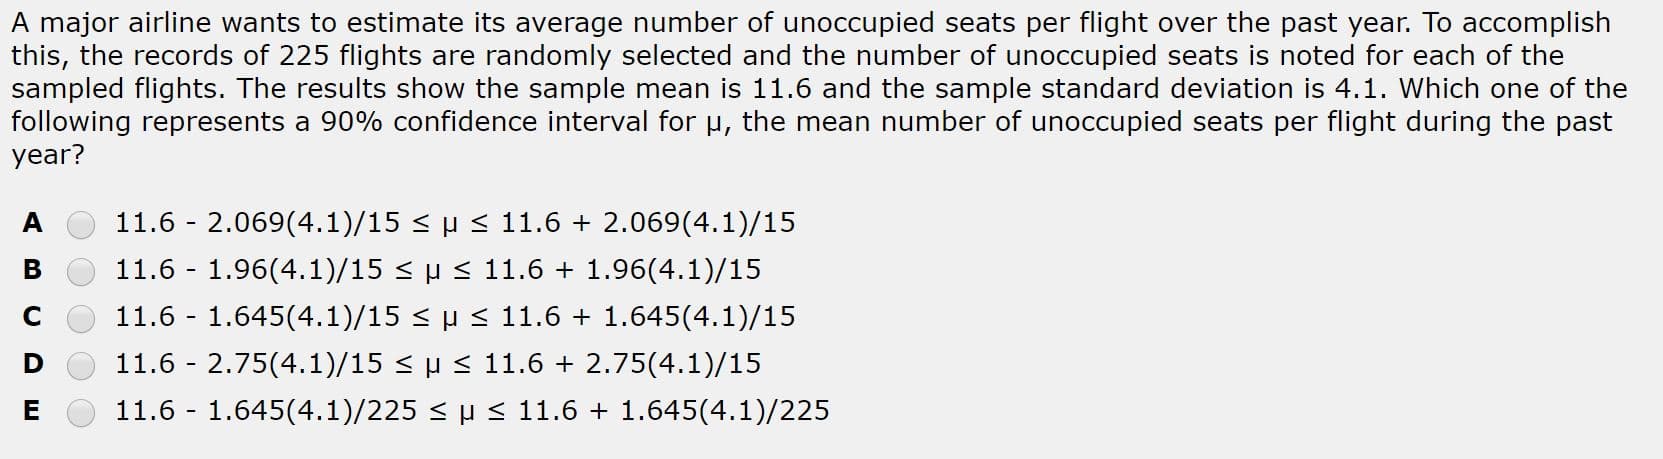 A major airline wants to estimate its average number of unoccupied seats per flight over the past year. To accomplish
this, the records of 225 flights are randomly selected and the number of unoccupied seats is noted for each of the
sampled flights. The results show the sample mean is 11.6 and the sample standard deviation is 4.1. Which one of the
following represents a 90% confidence interval for u, the mean number of unoccupied seats per flight during the past
year?
11.6 - 2.069(4.1)/15 < µ < 11.6 + 2.069(4.1)/15
11.6 - 1.96(4.1)/15 < µ < 11.6 + 1.96(4.1)/15
11.6 - 1.645(4.1)/15 < µ < 11.6 + 1.645(4.1)/15
11.6 - 2.75(4.1)/15 < µ < 11.6 + 2.75(4.1)/15
11.6 - 1.645(4.1)/225 < H < 11.6 + 1.645(4.1)/225
